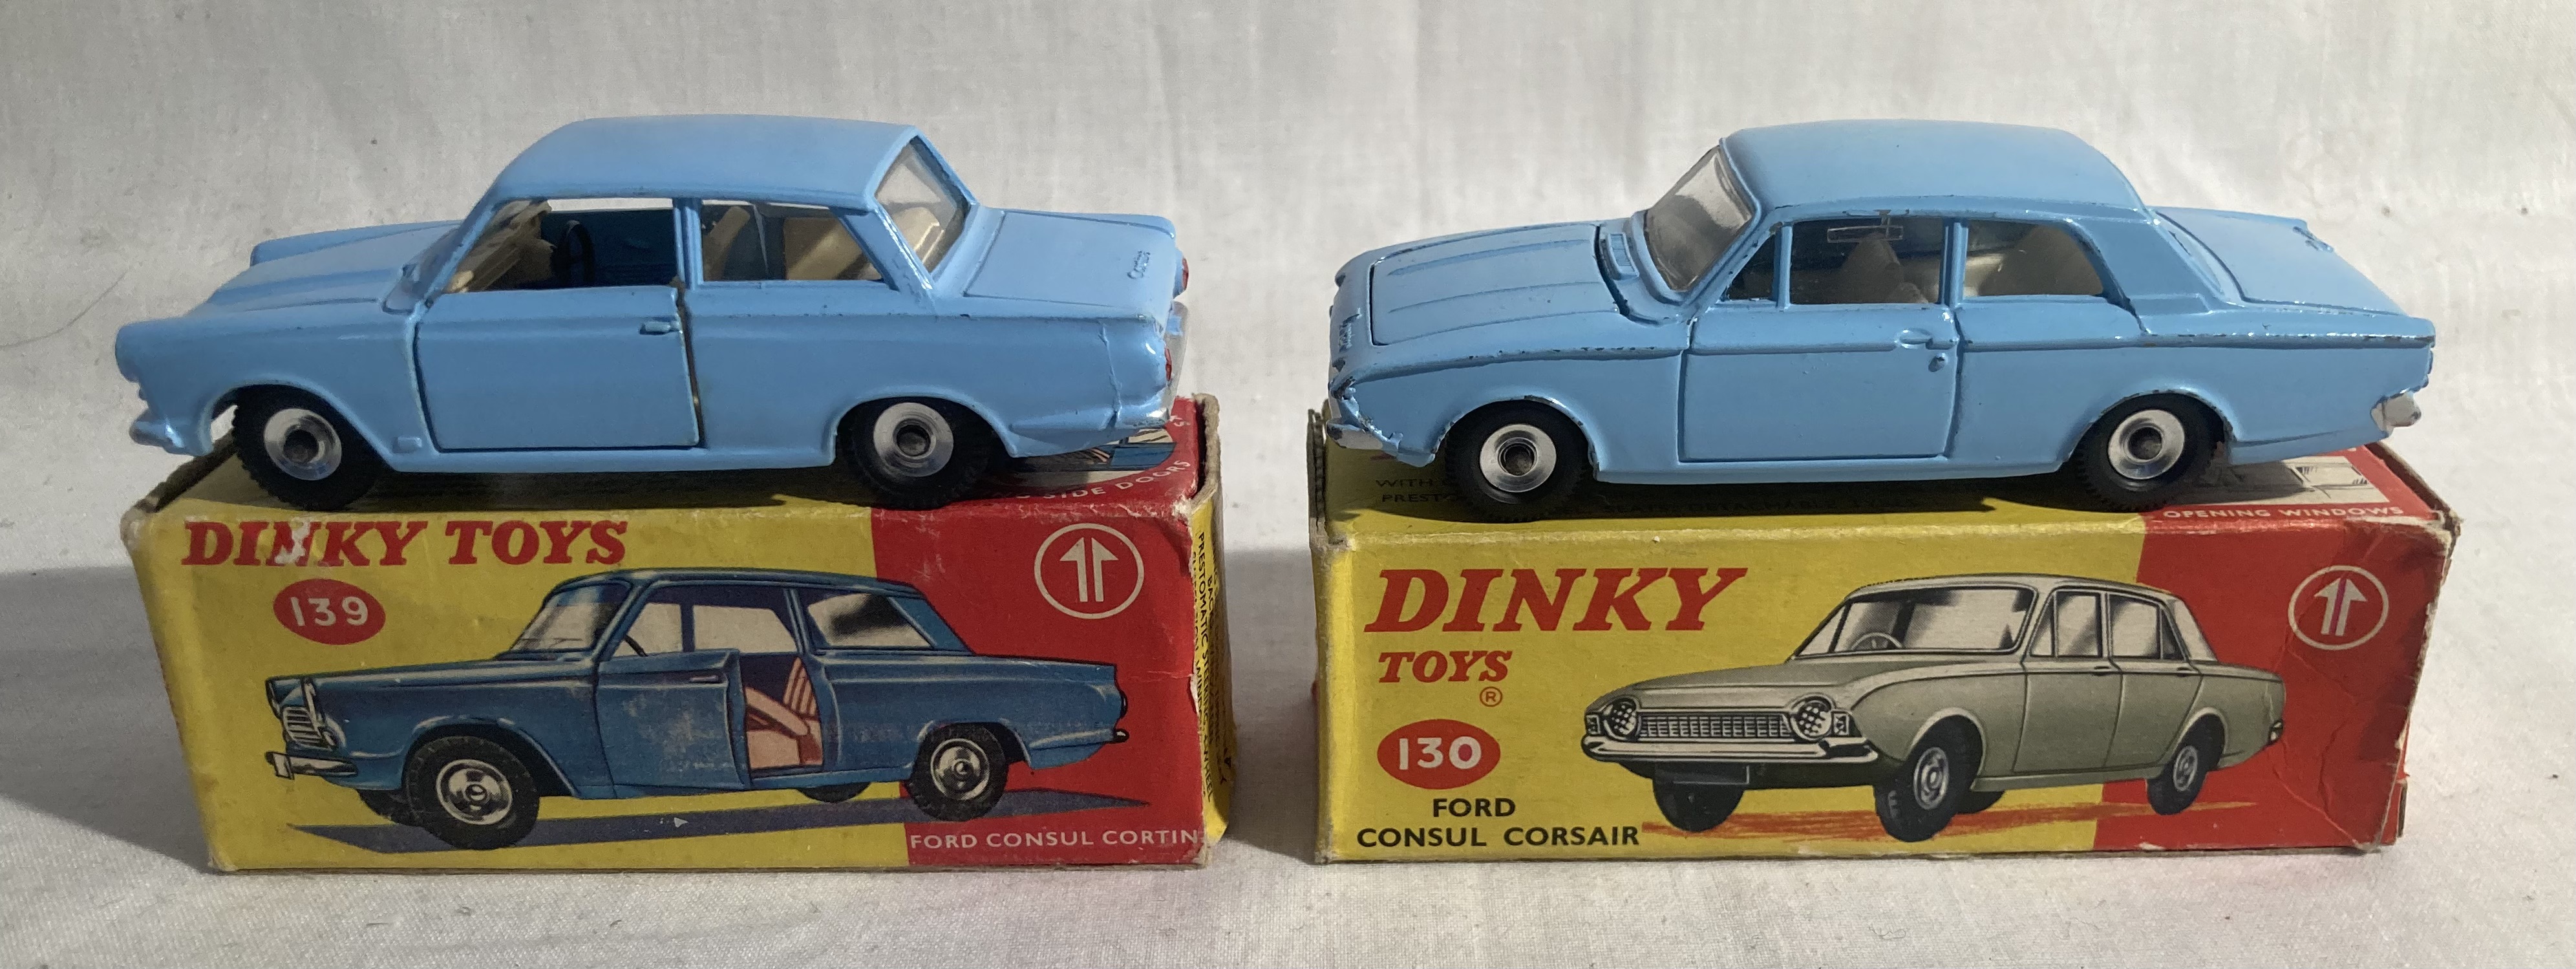 Dinky: A boxed Dinky Toys, Ford Consul Corsair 130, together with another boxed Dinky Toys Ford